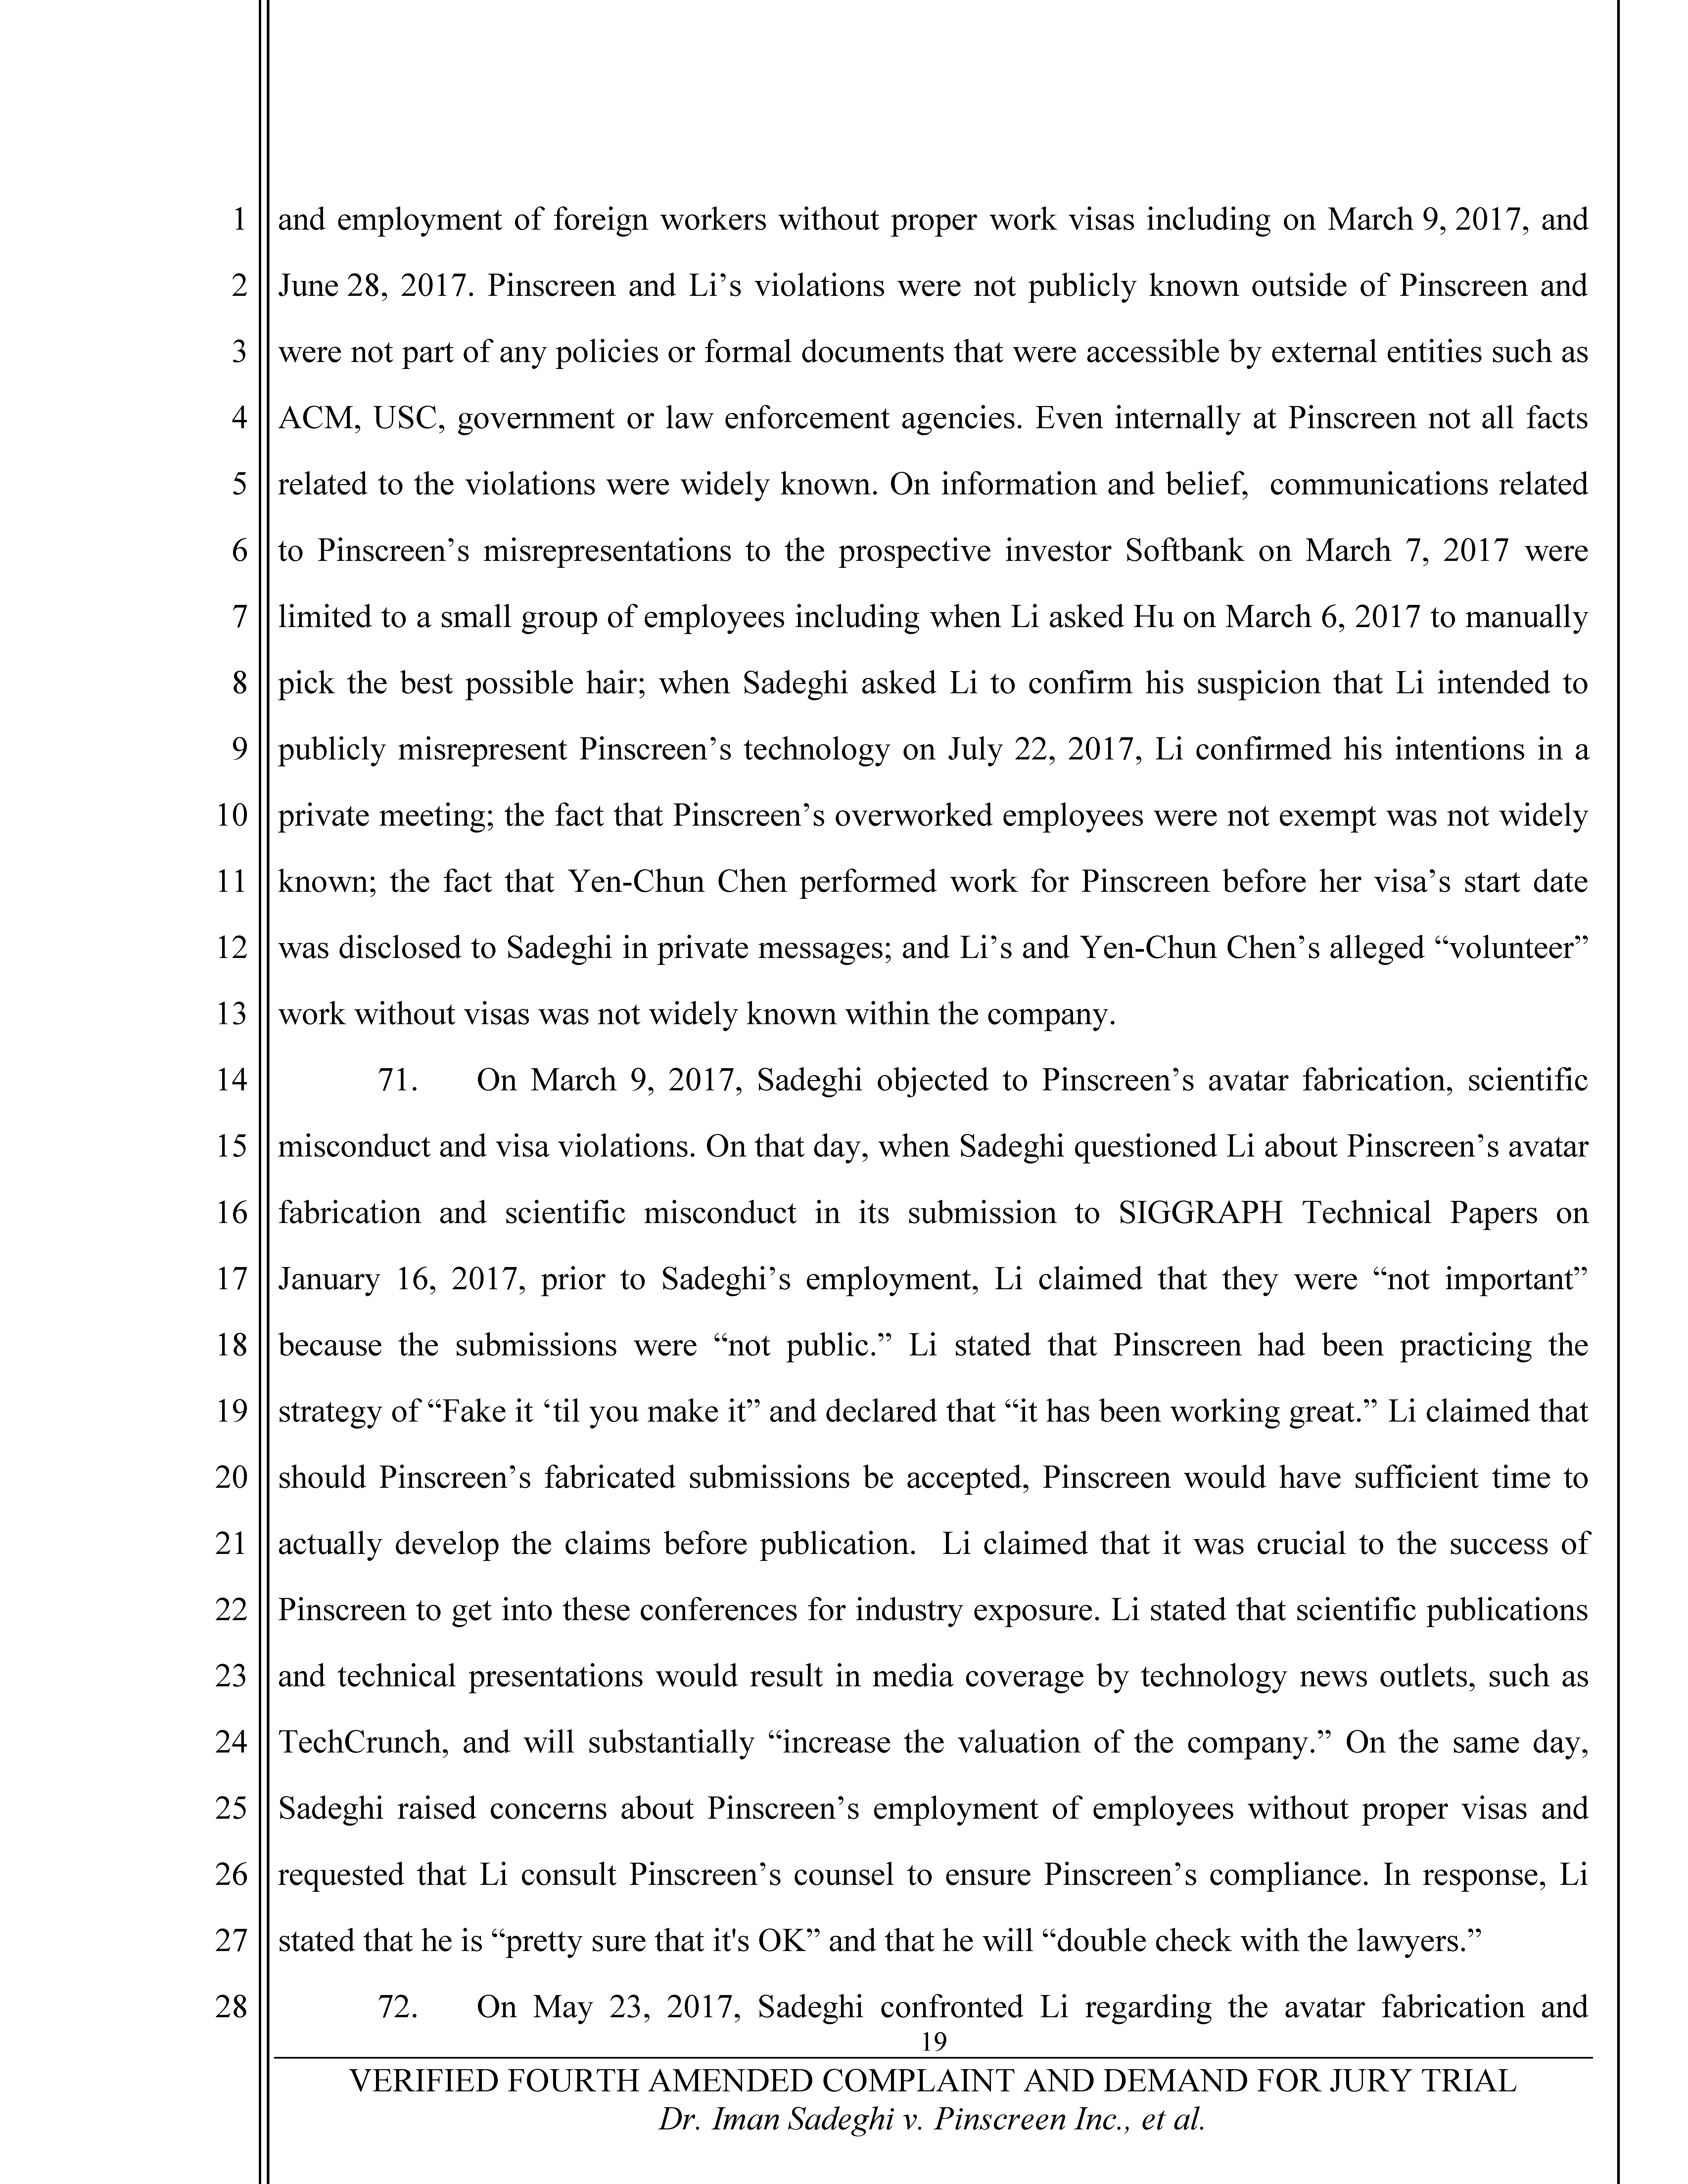 Fourth Amended Complaint (4AC) Page 20